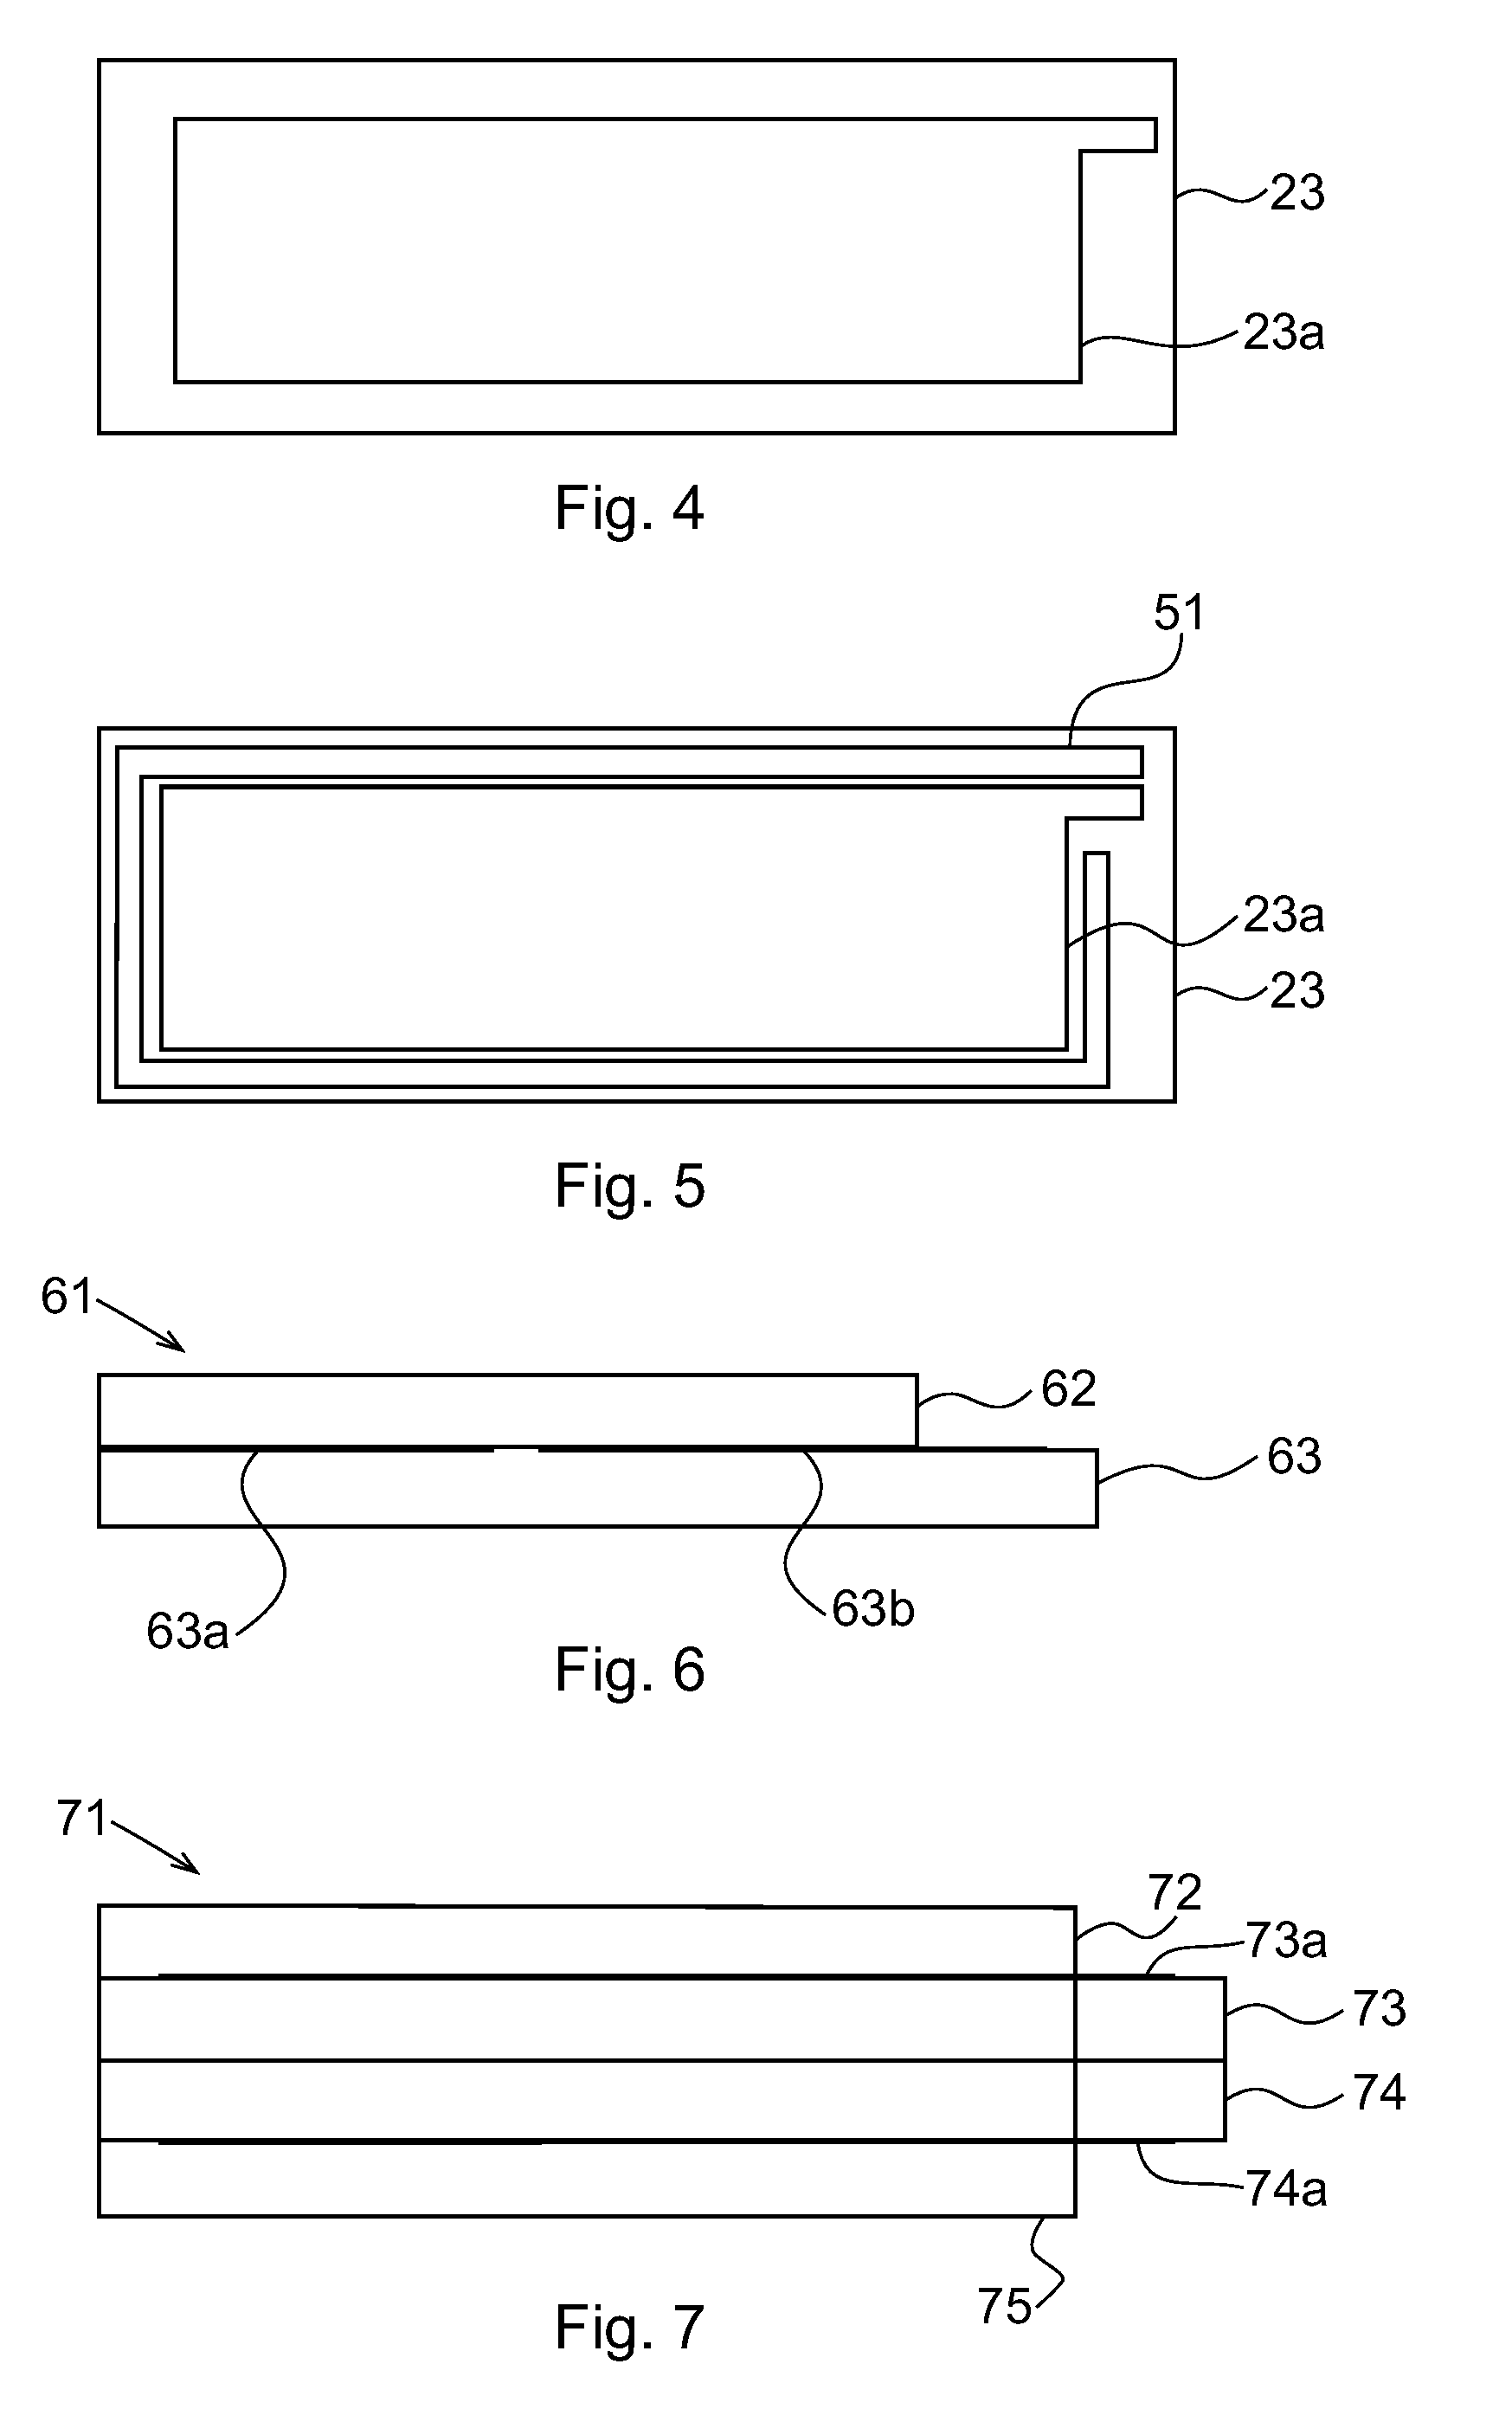 Test Body, Test Arrangement, Method For Manufacturing Of A Test Body, And Method For Determining A Moisture Content Of The Insulation Of A Power Transformer During Drying Thereof